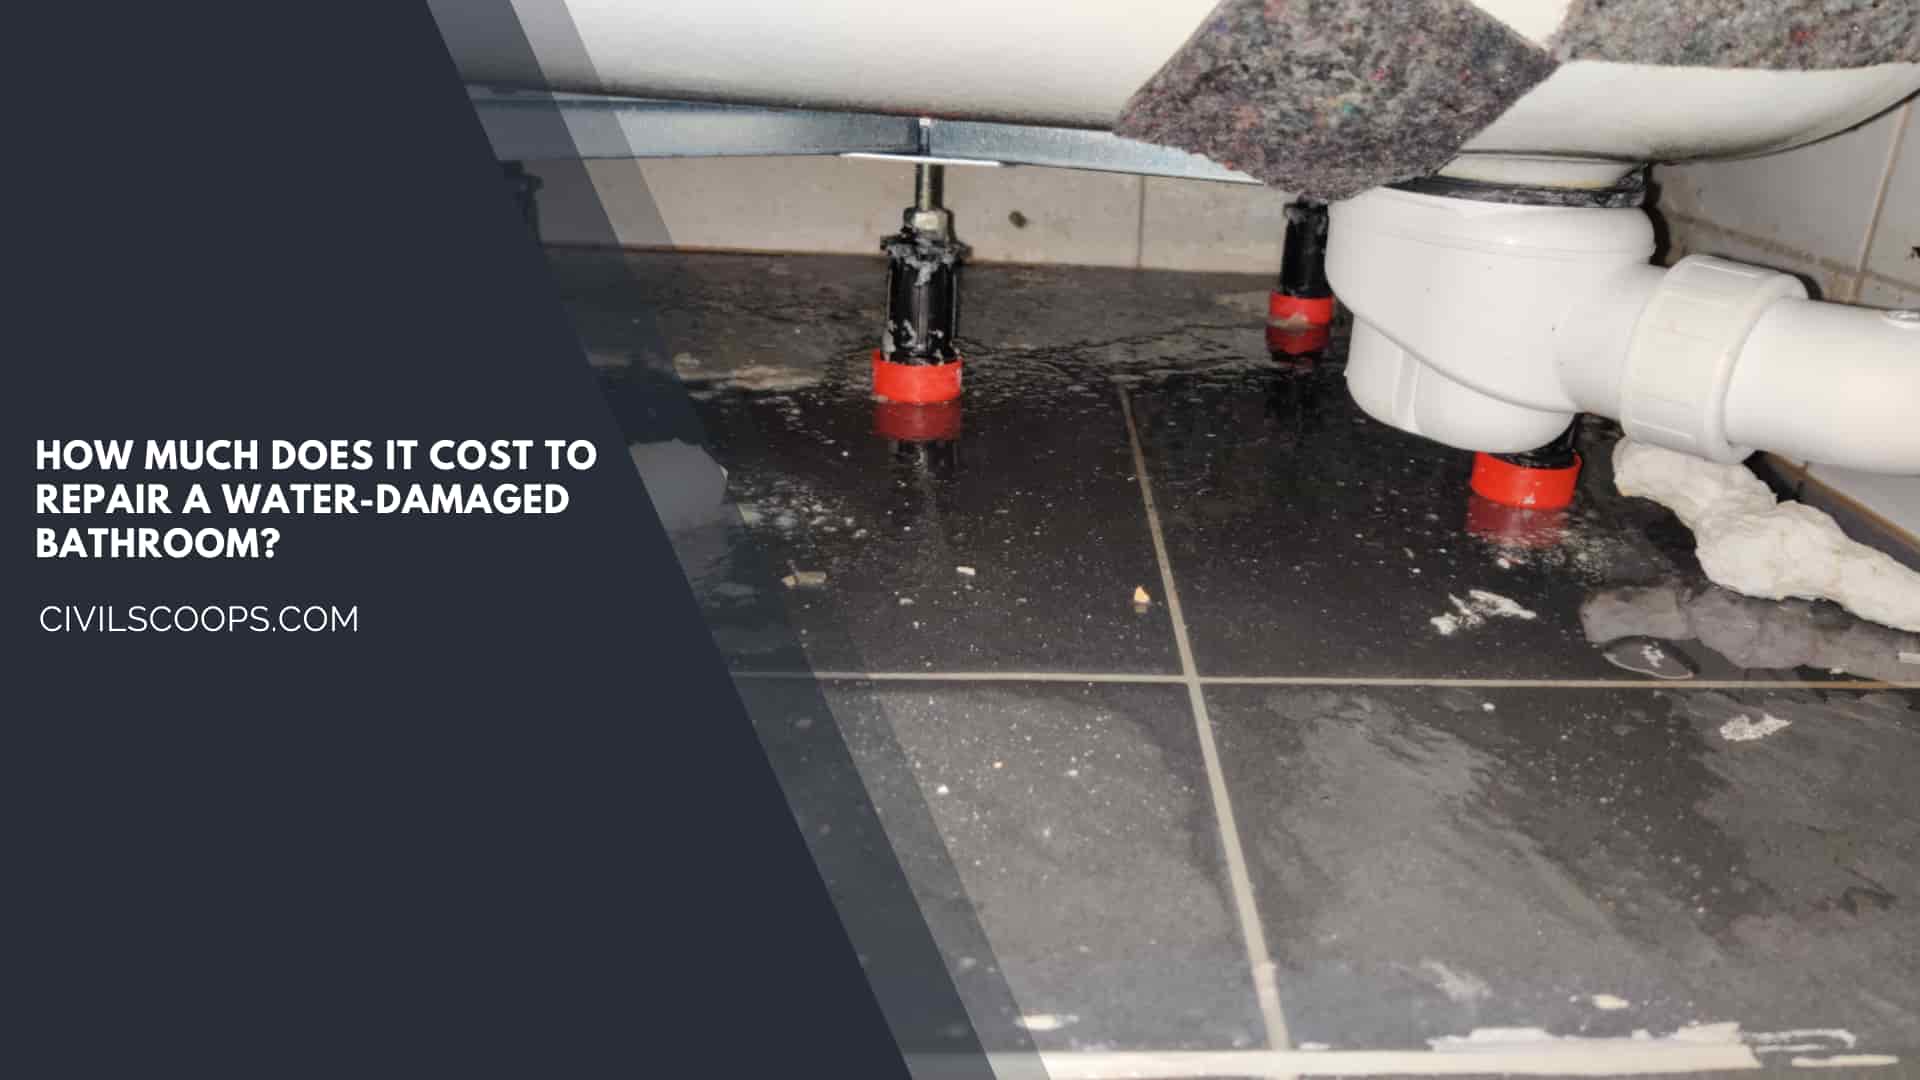 How Much Does It Cost to Repair a Water-Damaged Bathroom?